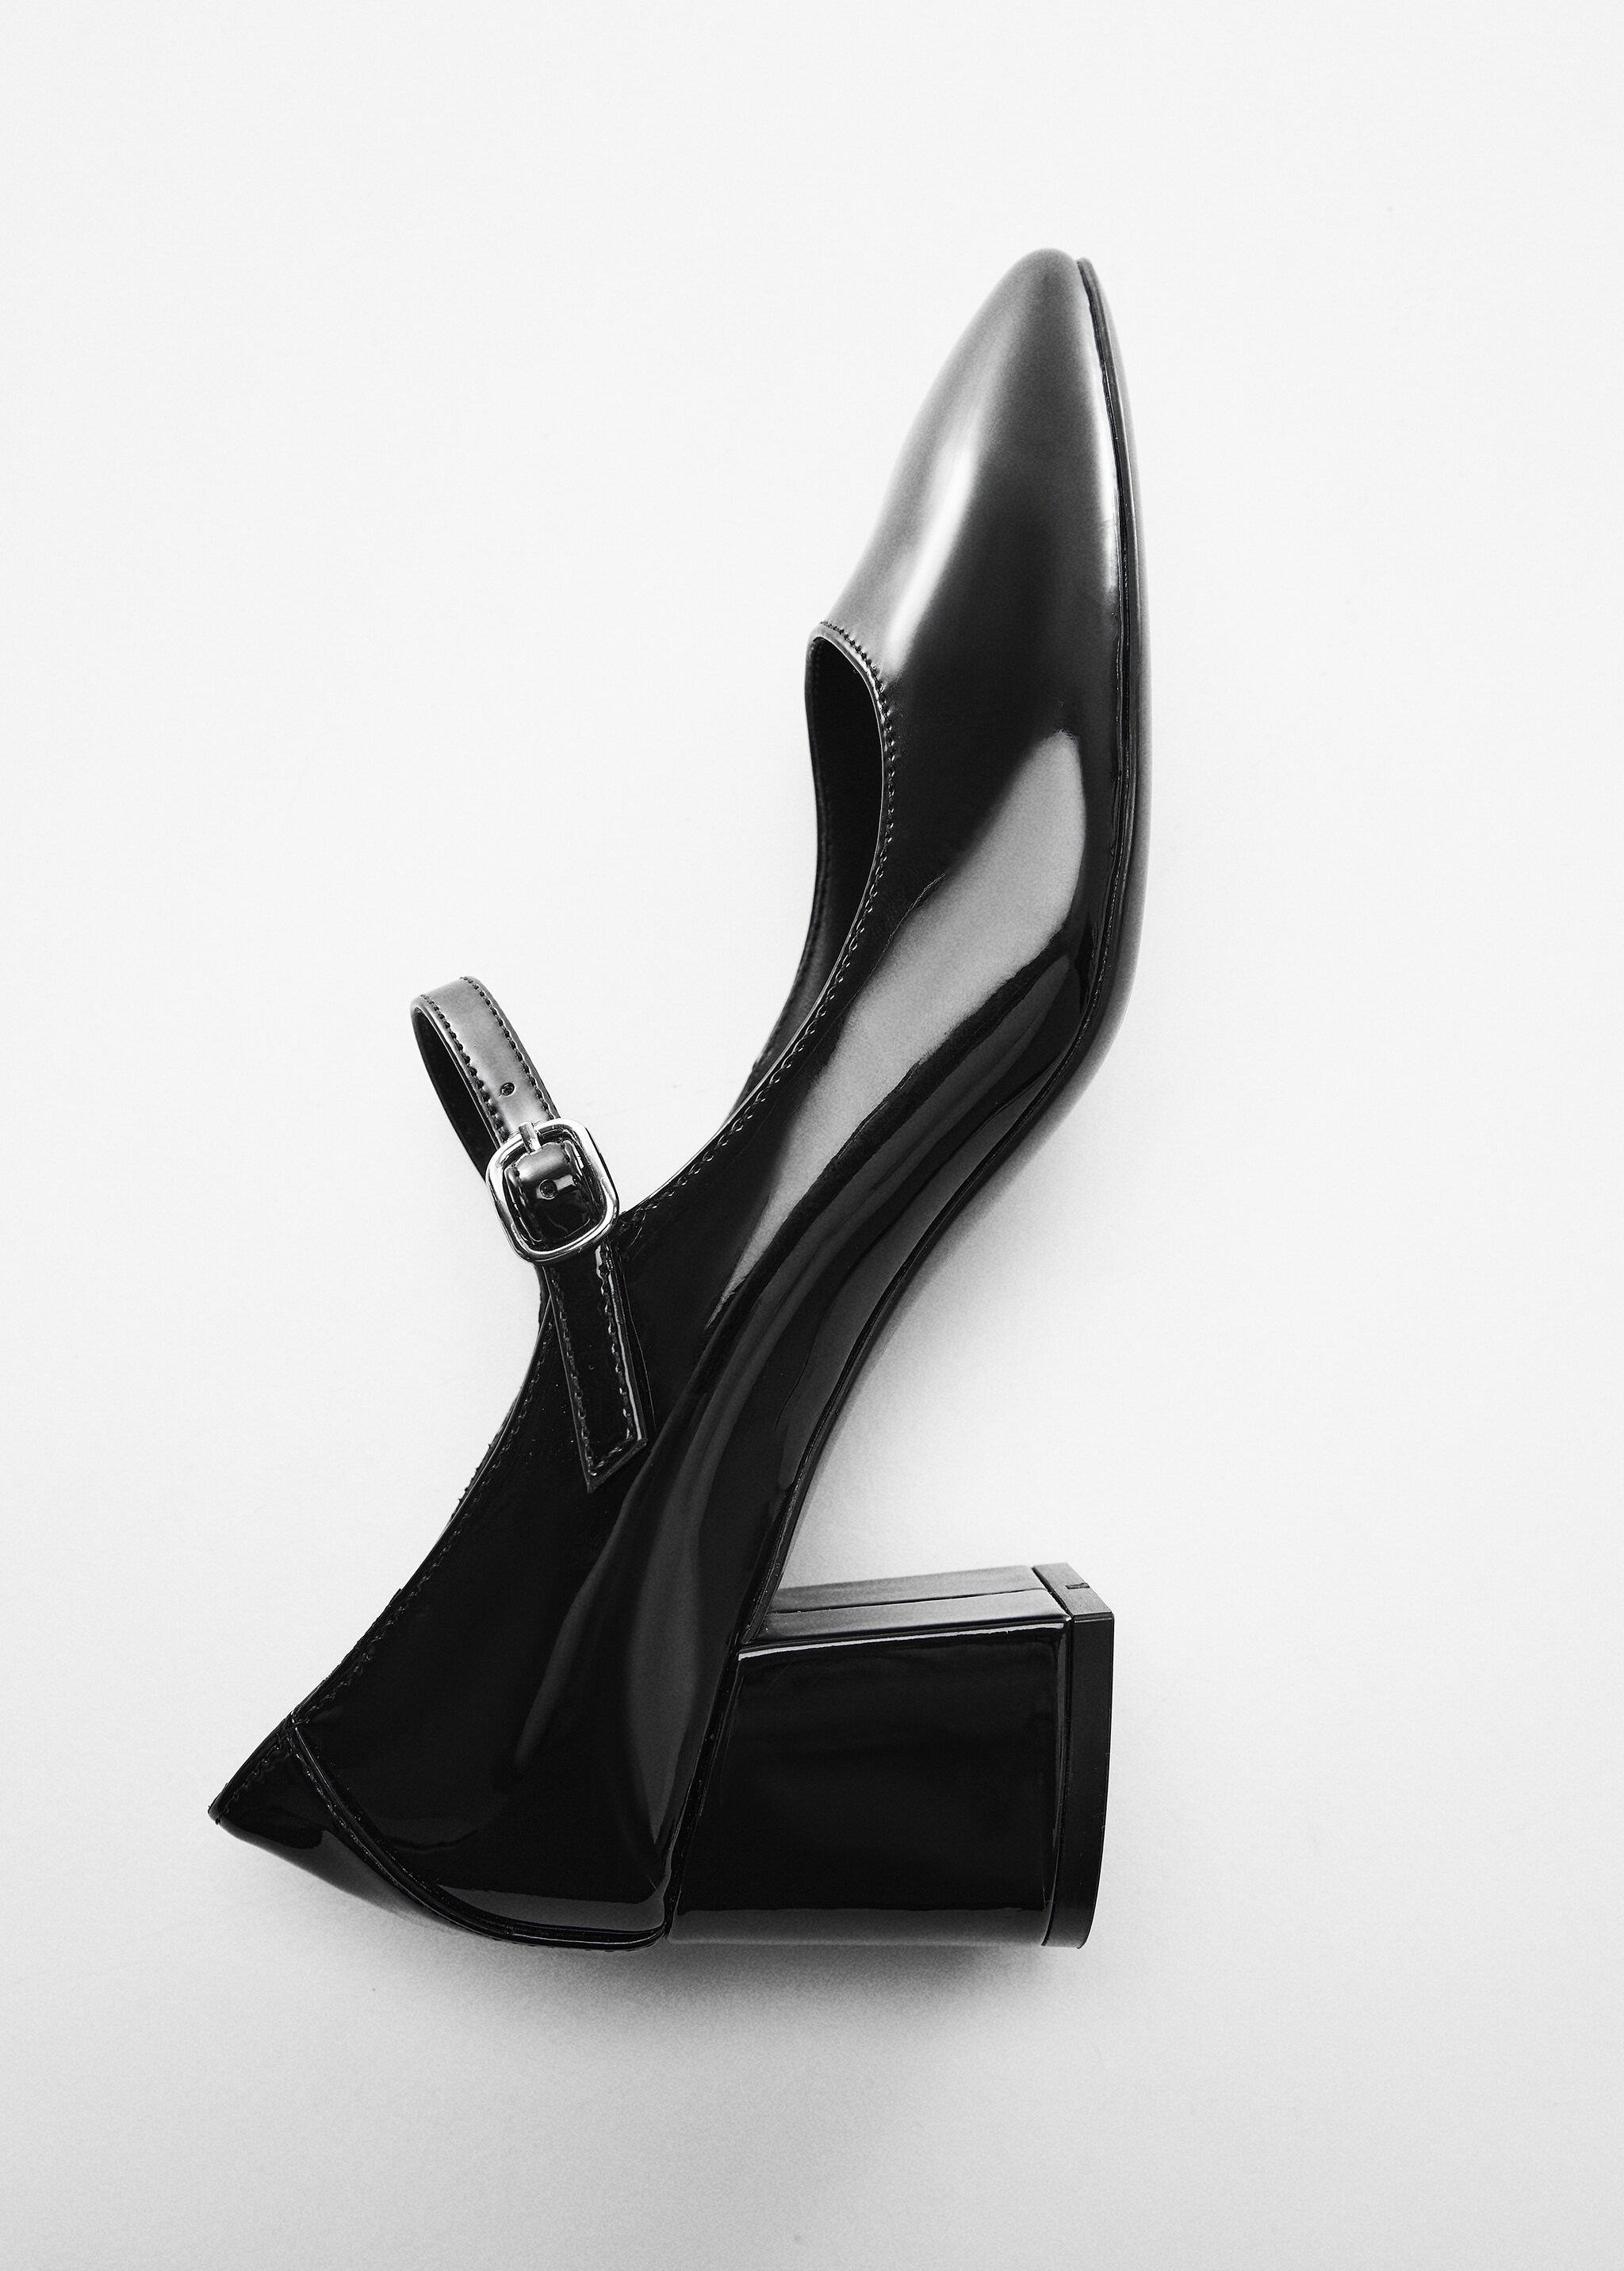 Patent leather-effect heeled shoes - Details of the article 5